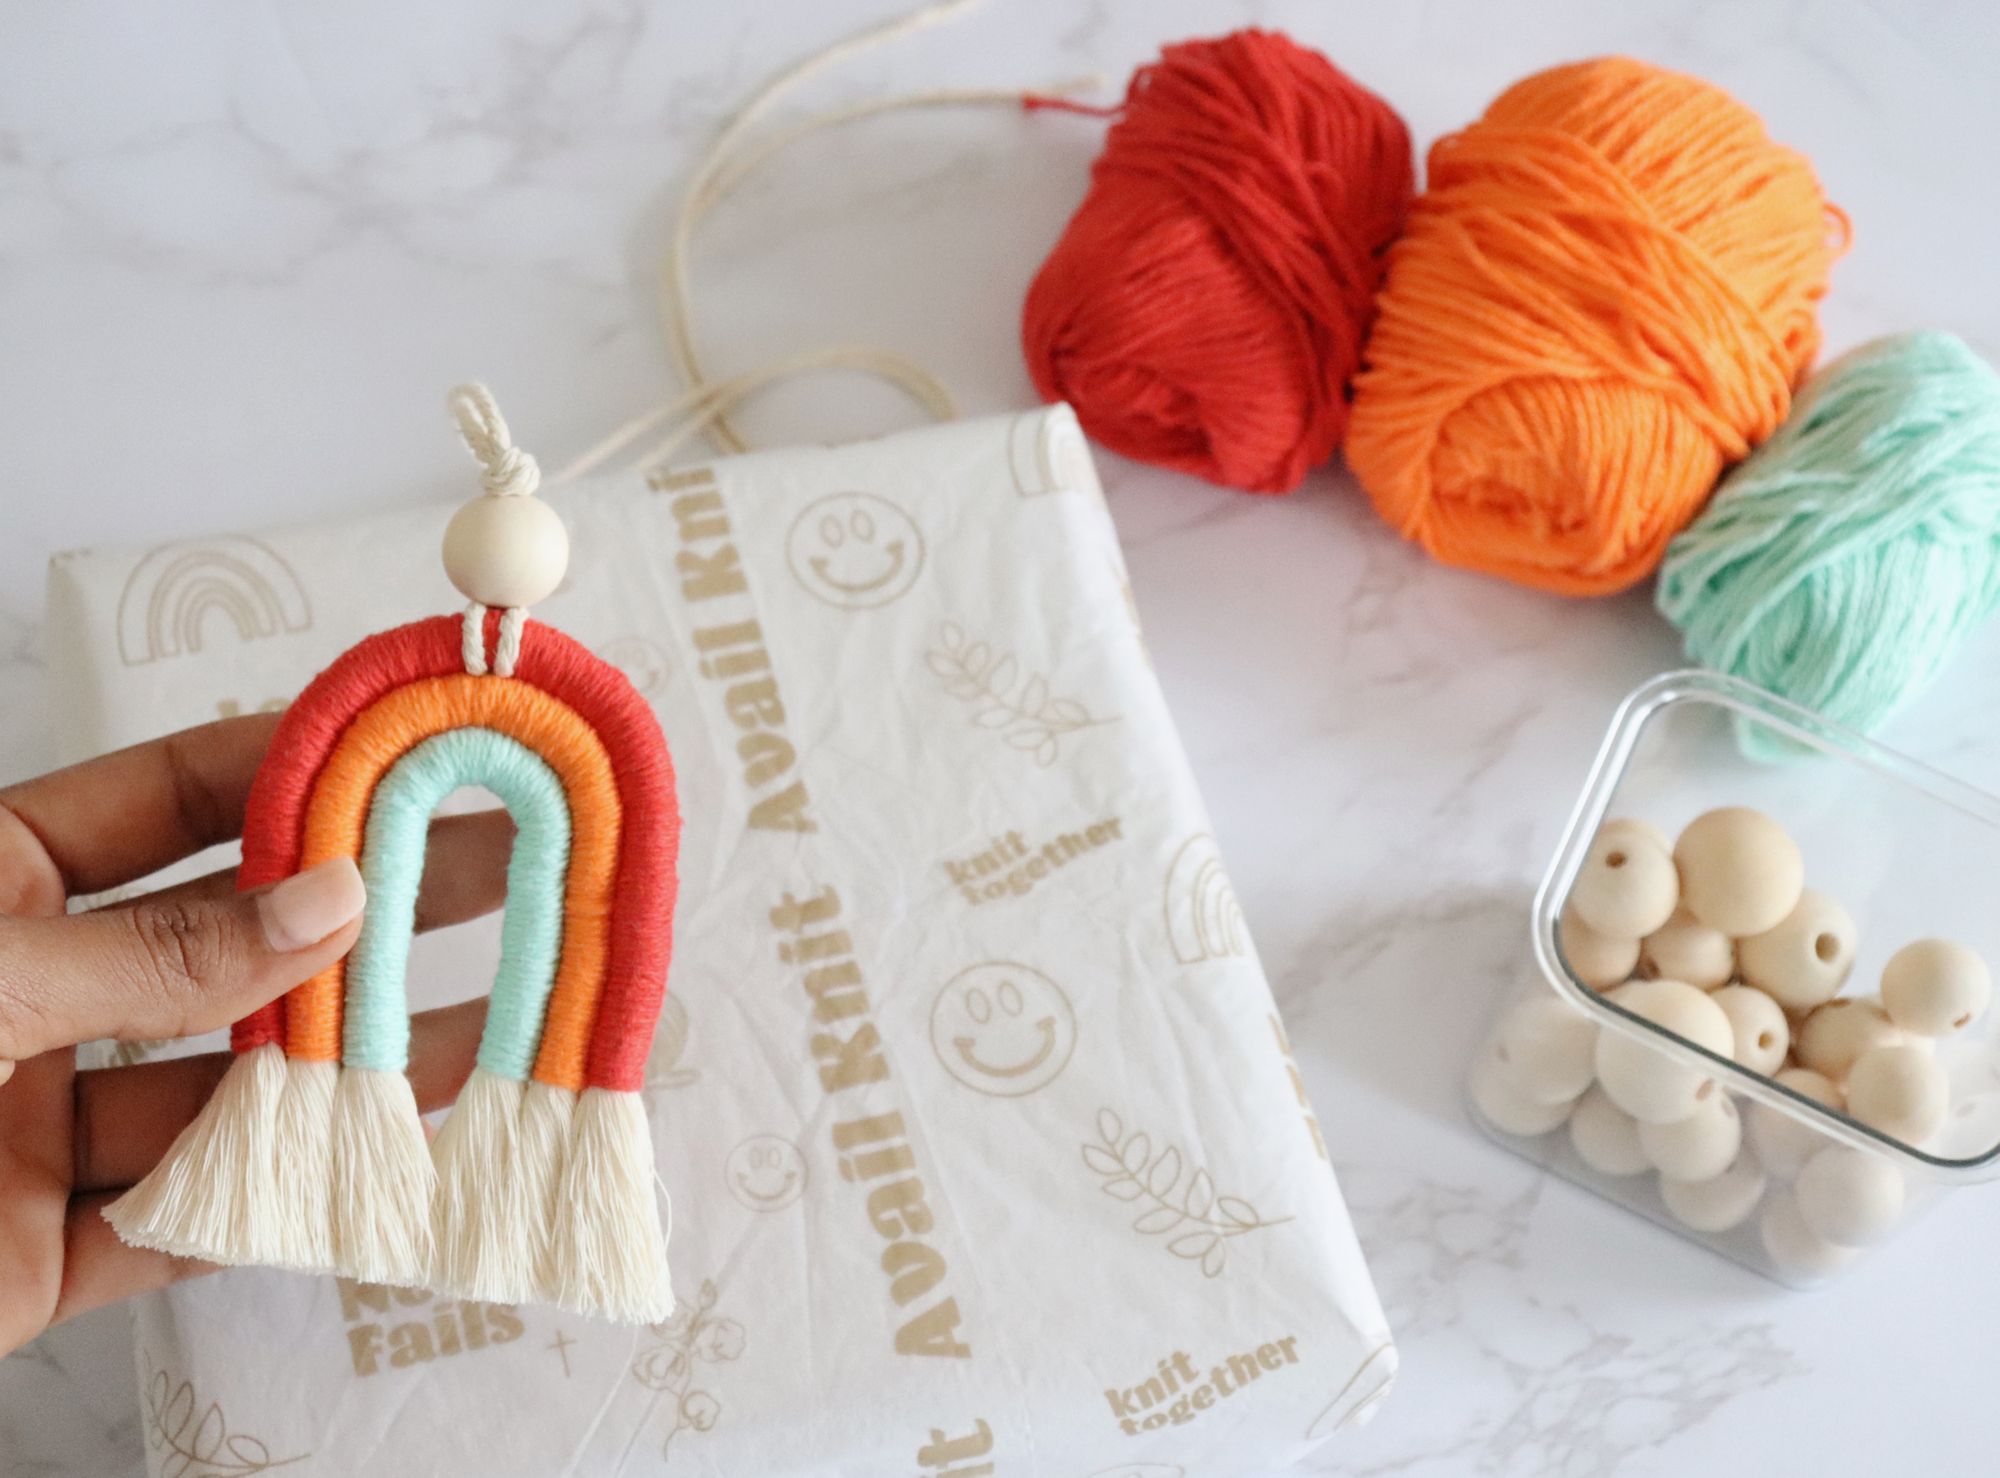 Avail Knit: Knot Your Ordinary Knit Business